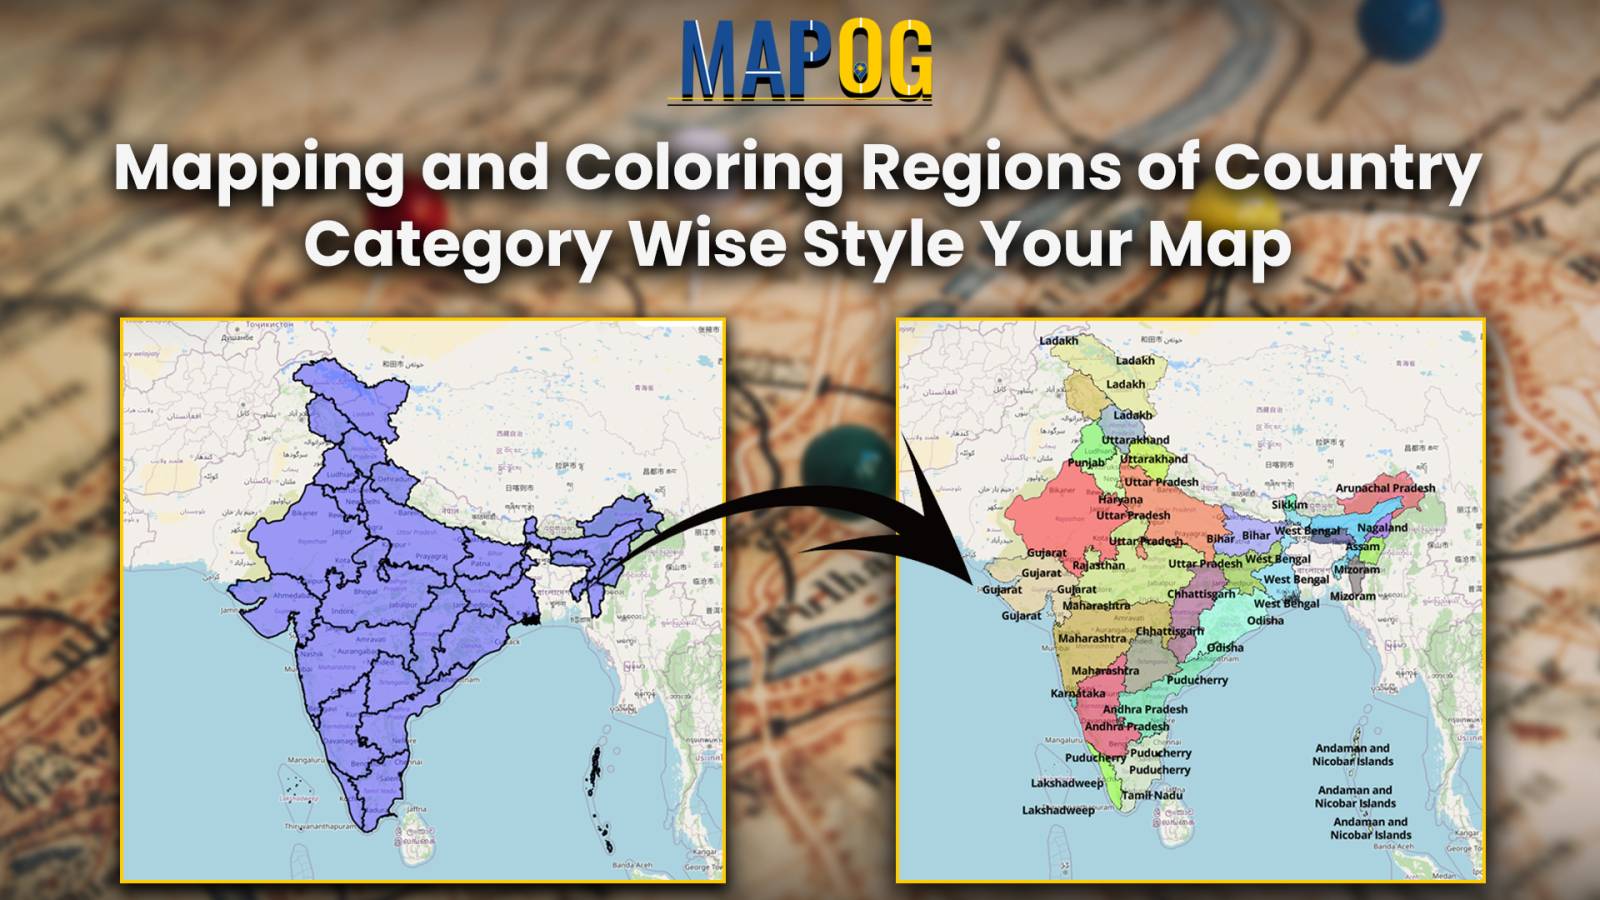 Mapping and Coloring Regions of Country – Category Wise Style Your Map